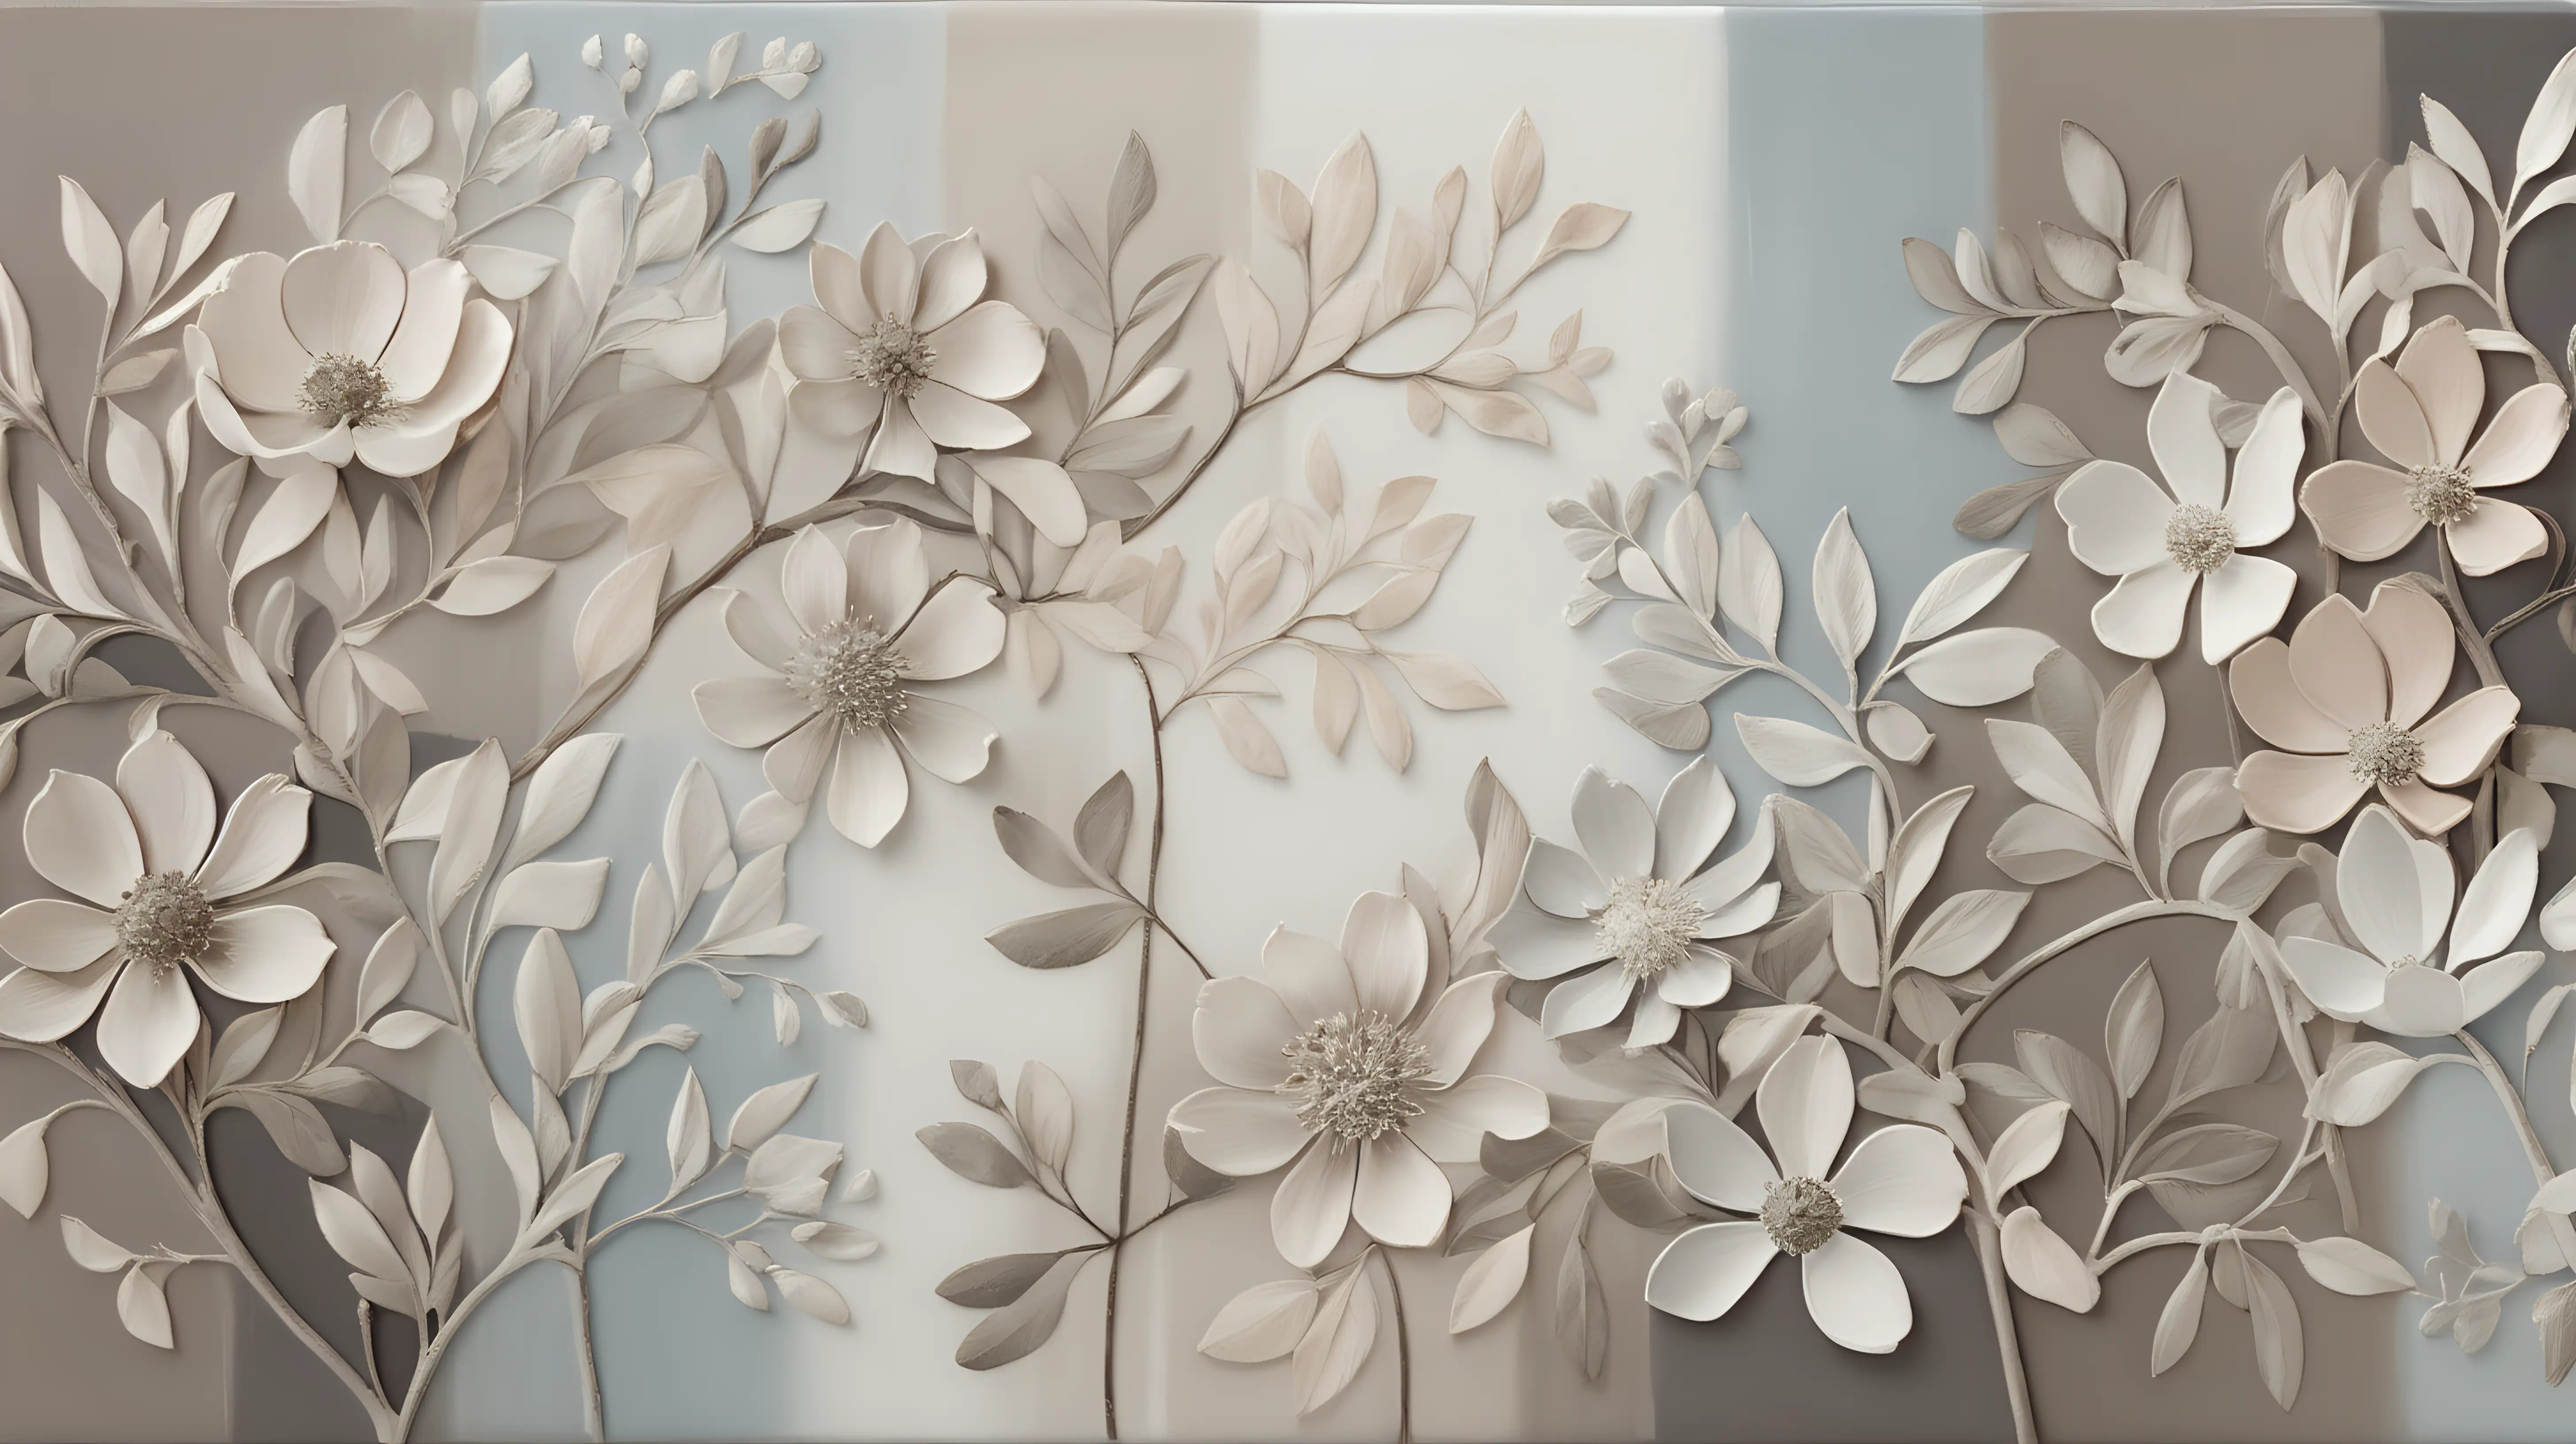 Tranquil Floral Symphony Delicate Botanical Shapes in Muted Tones